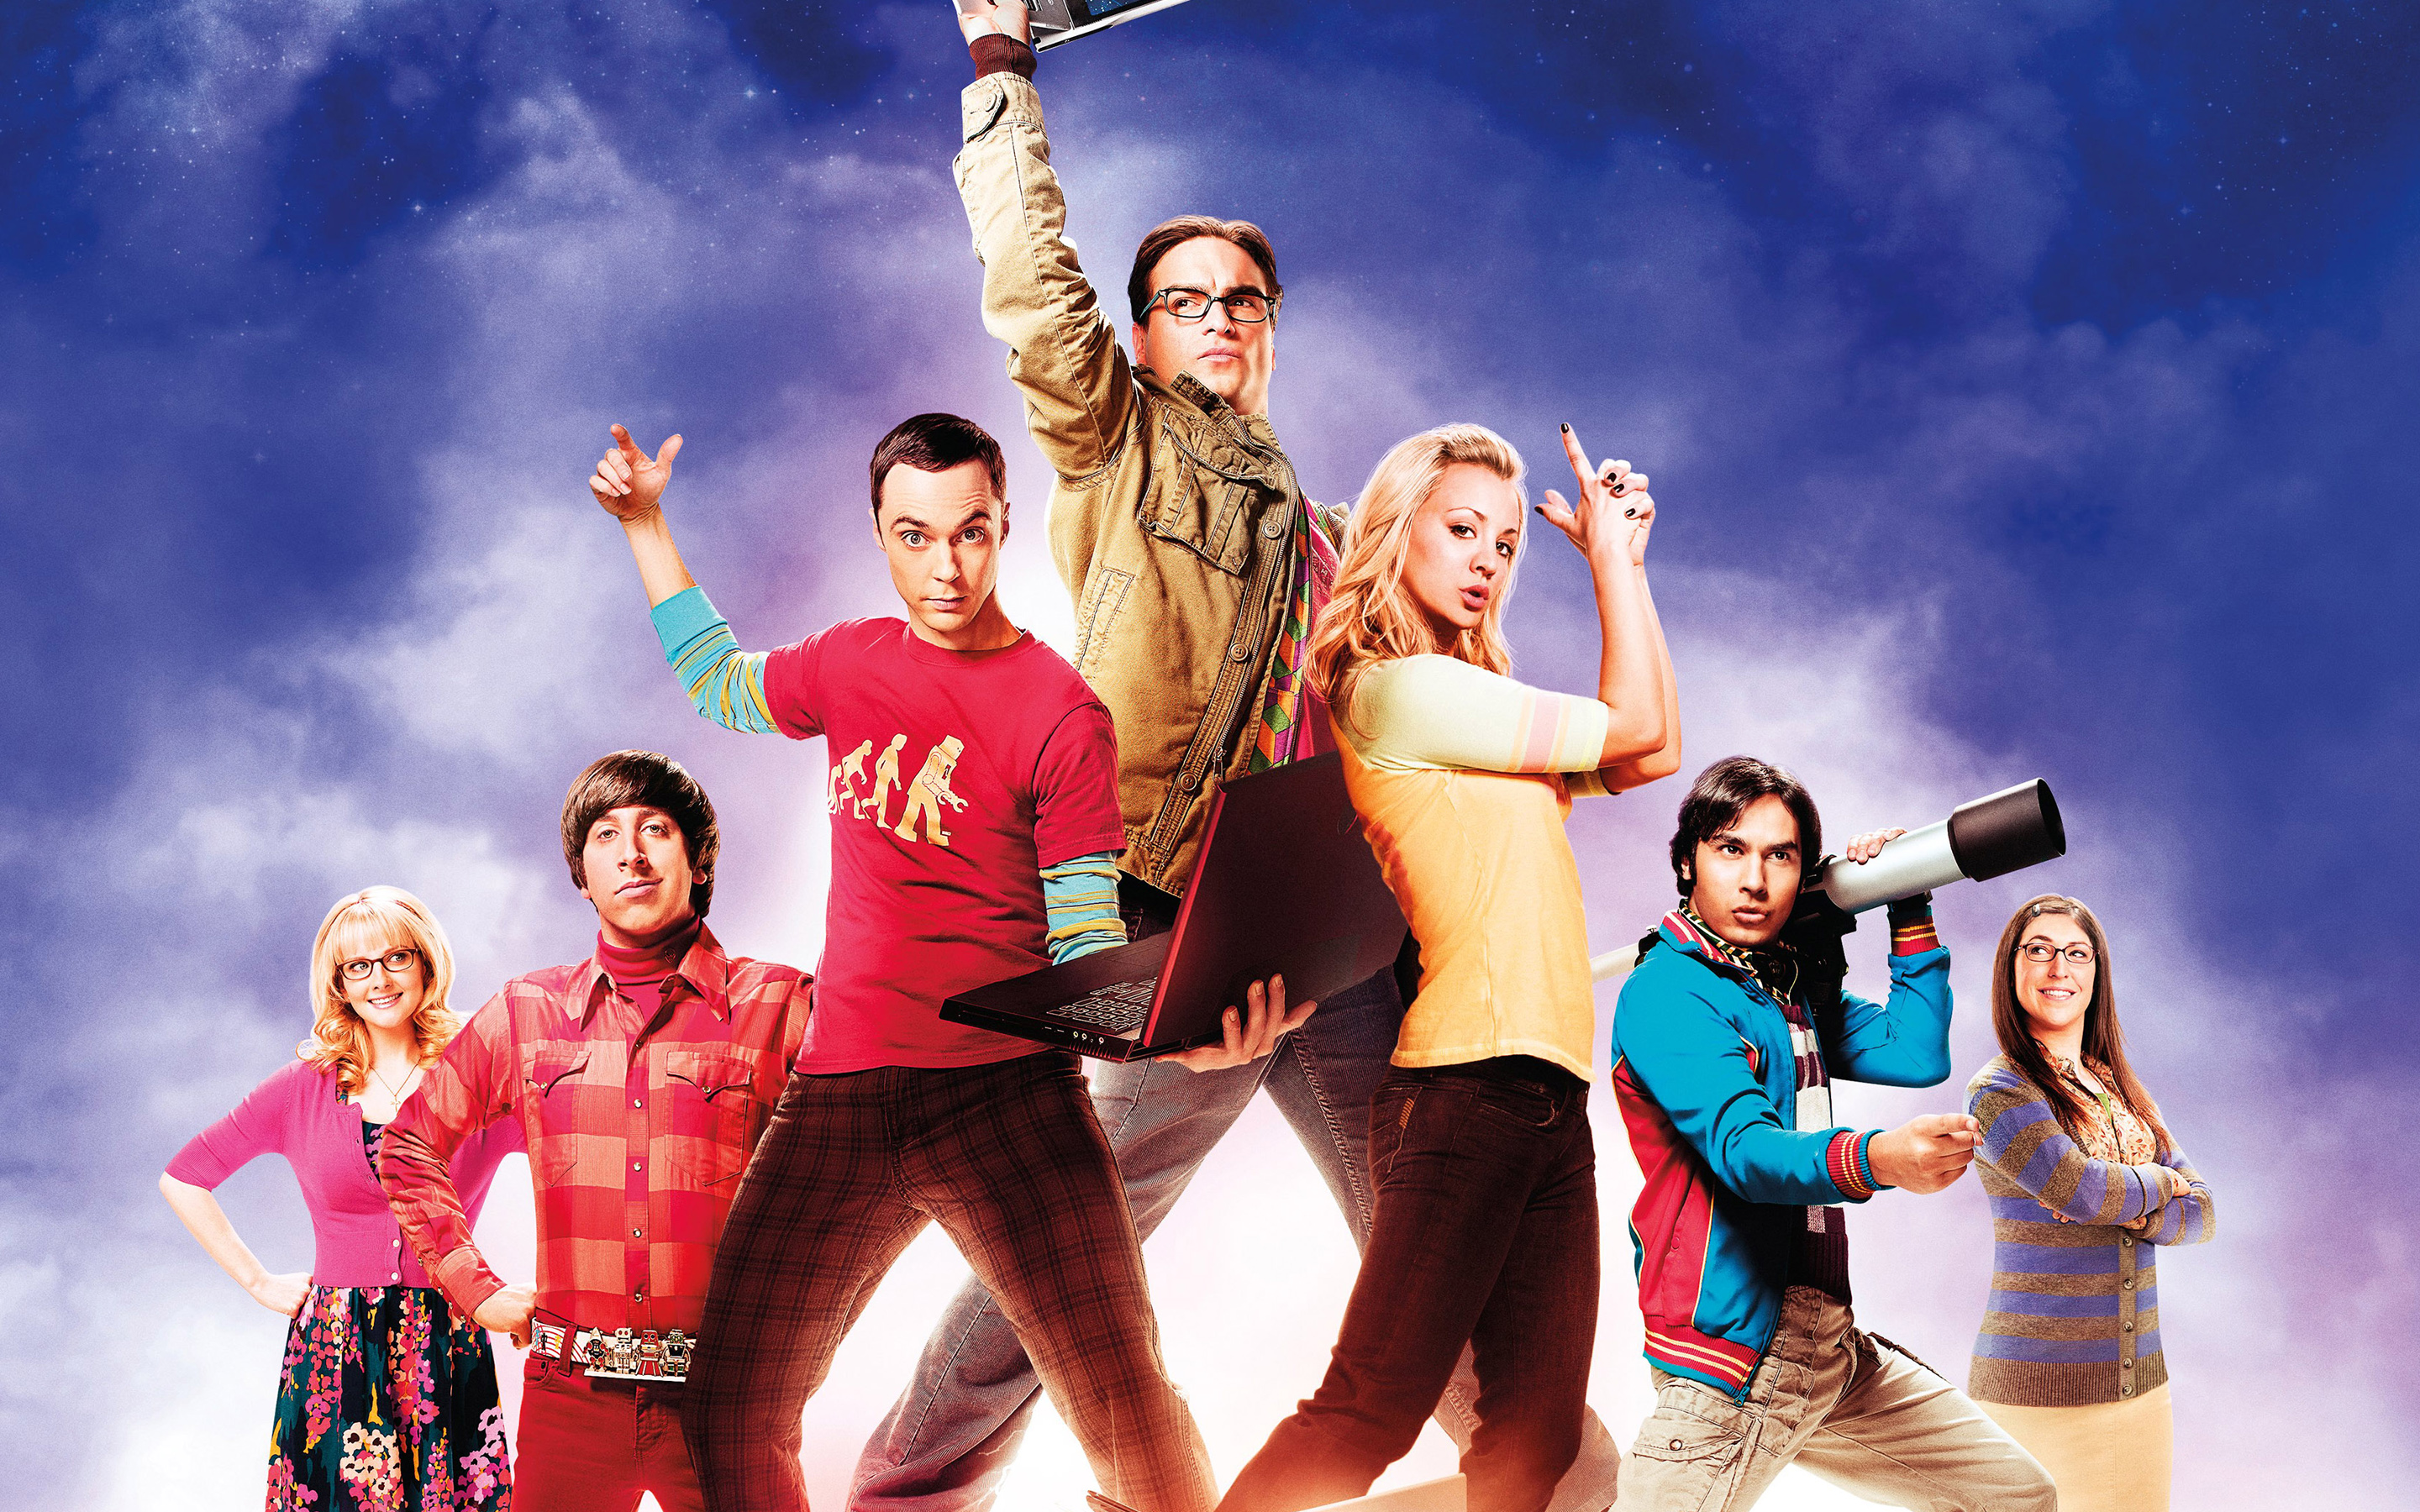 Download The Big Bang Theory Season Release Date Confirmed Geeks By Lisawilkinson The Big